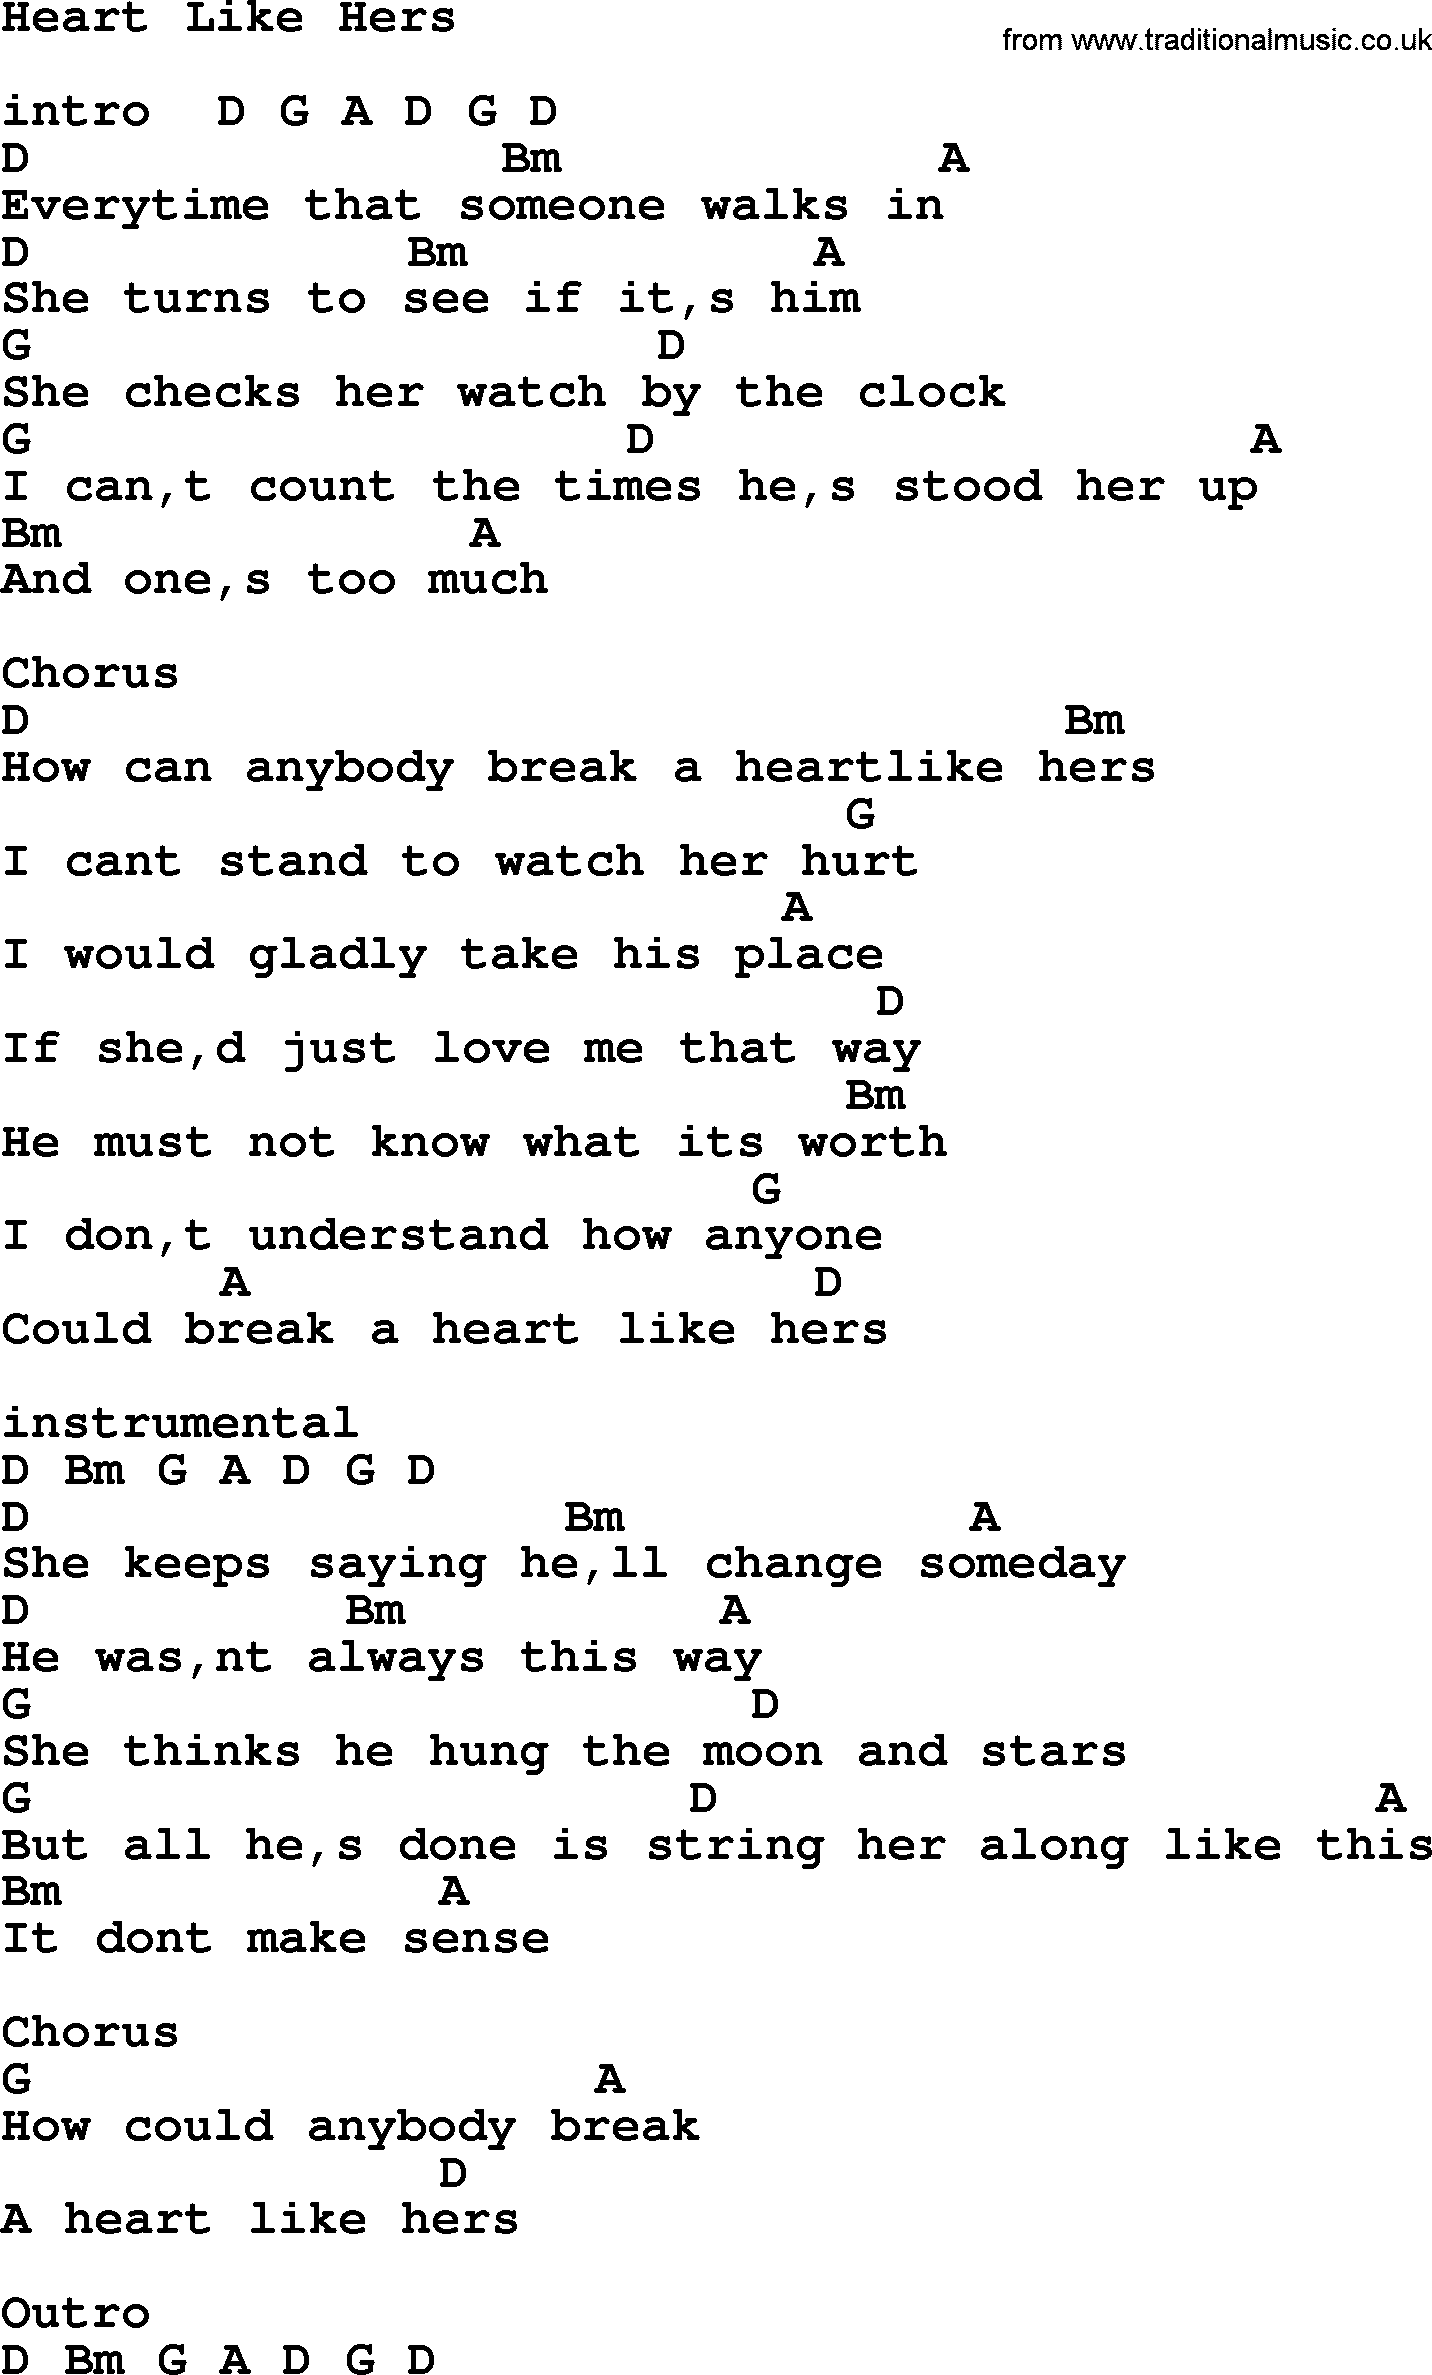 George Strait song: Heart Like Hers, lyrics and chords